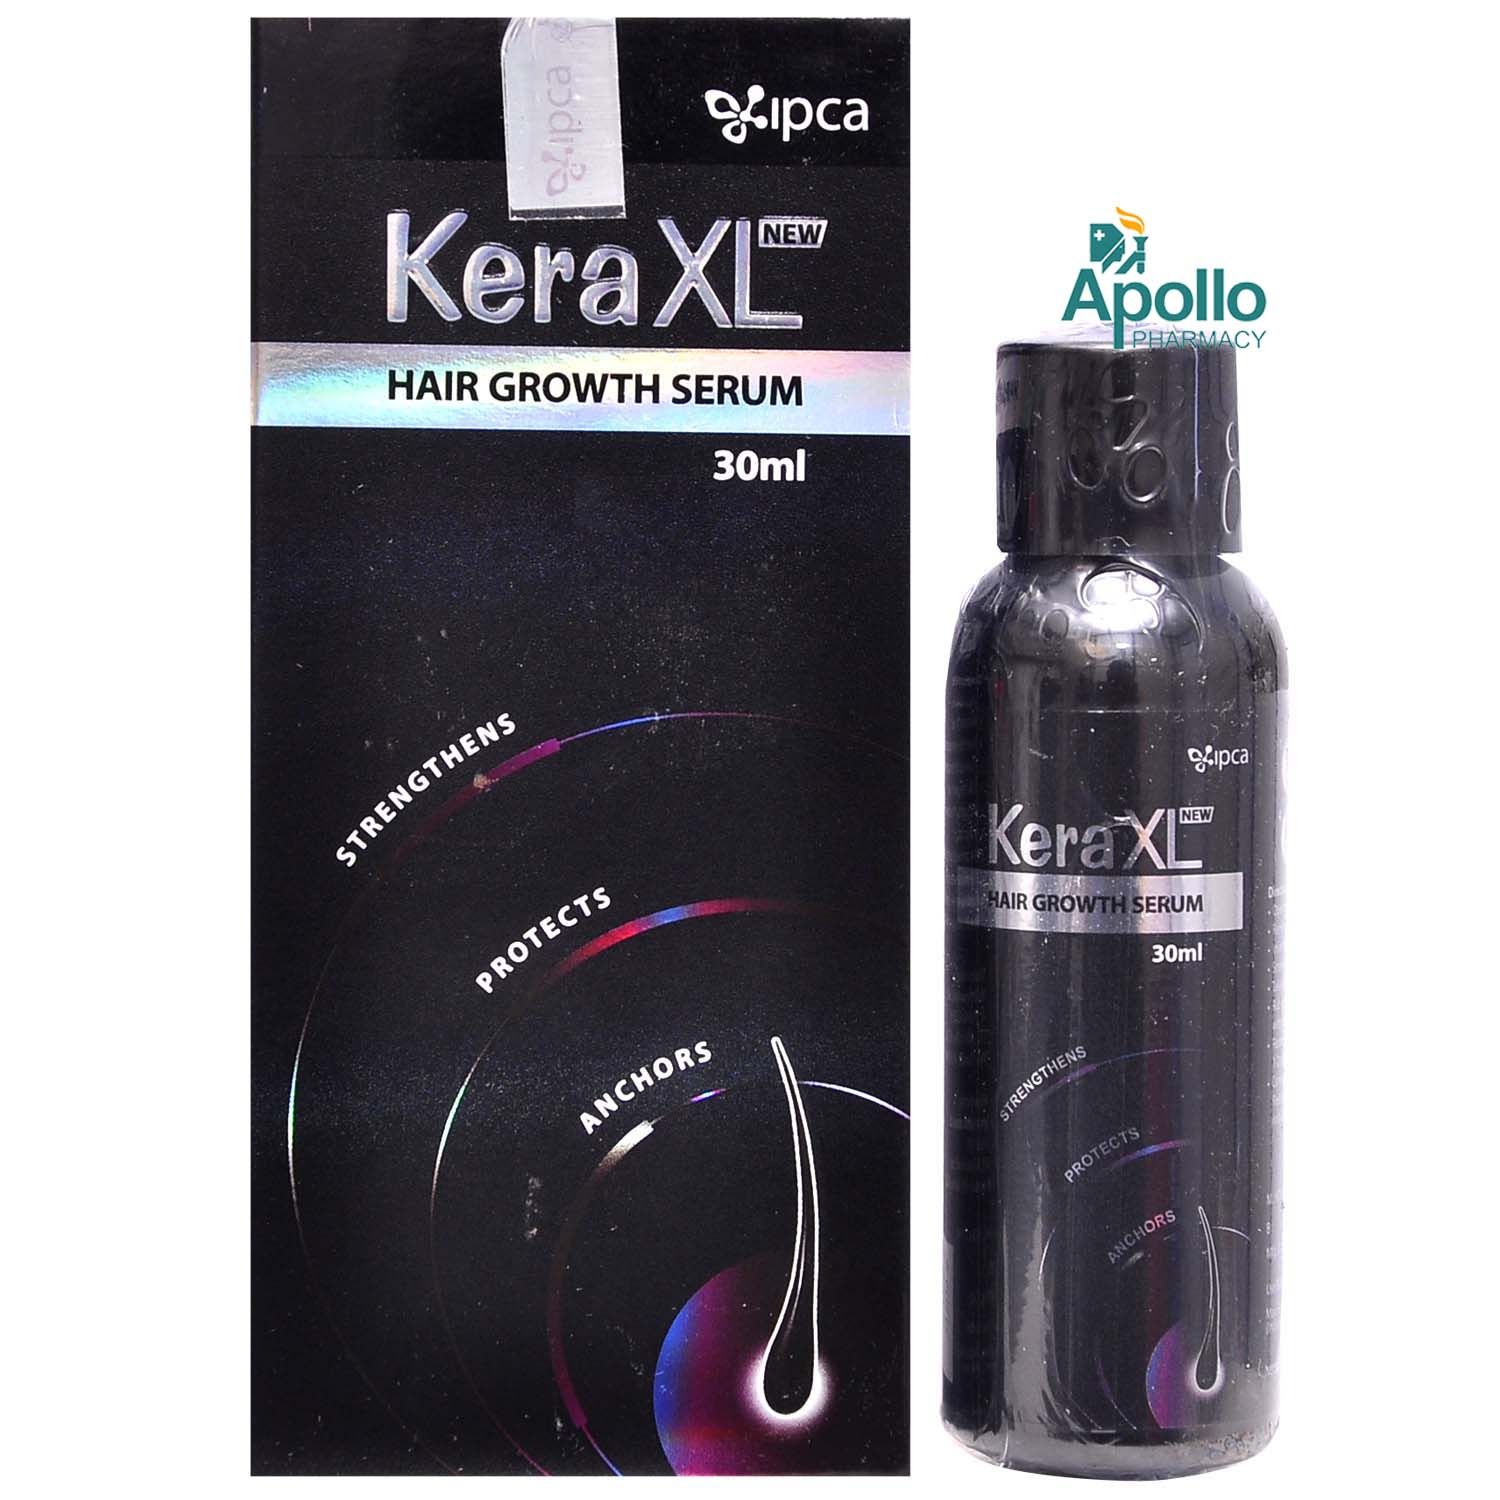 Kera XL New Hair Growth Serum, 30 ml Price, Uses, Side Effects, Composition  - Apollo Pharmacy